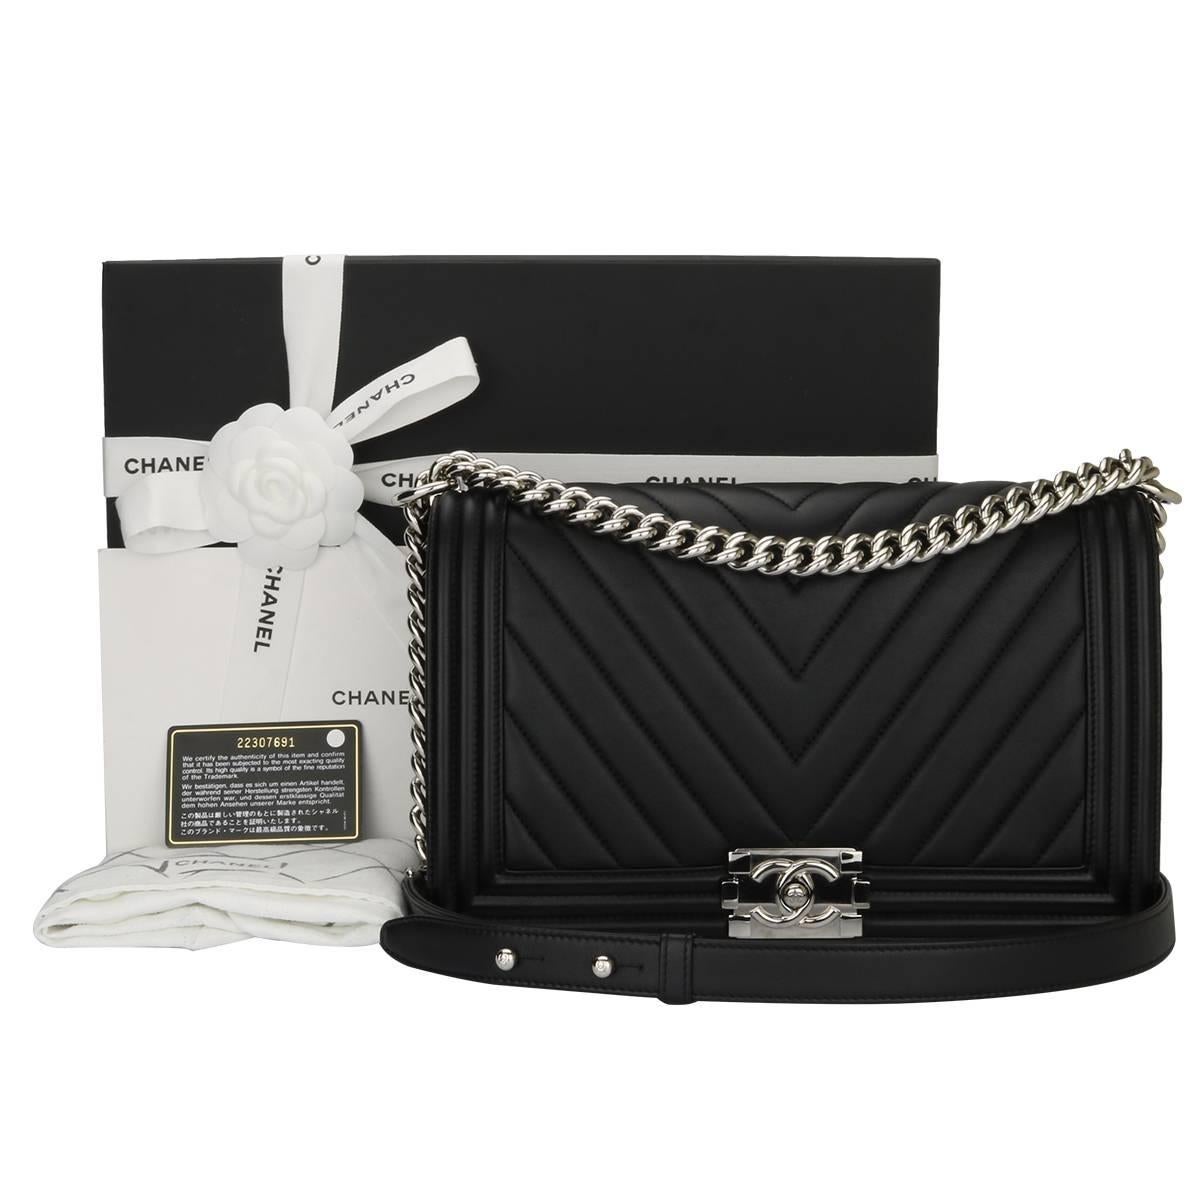 Authentic Chanel New Medium Chevron Boy Black Calfskin with Shiny Silver Hardware 2016.

This stunning bag is still in Mint condition, the bag still holds its original shape and the hardware is still very clean and shiny.

Exterior Condition: Mint